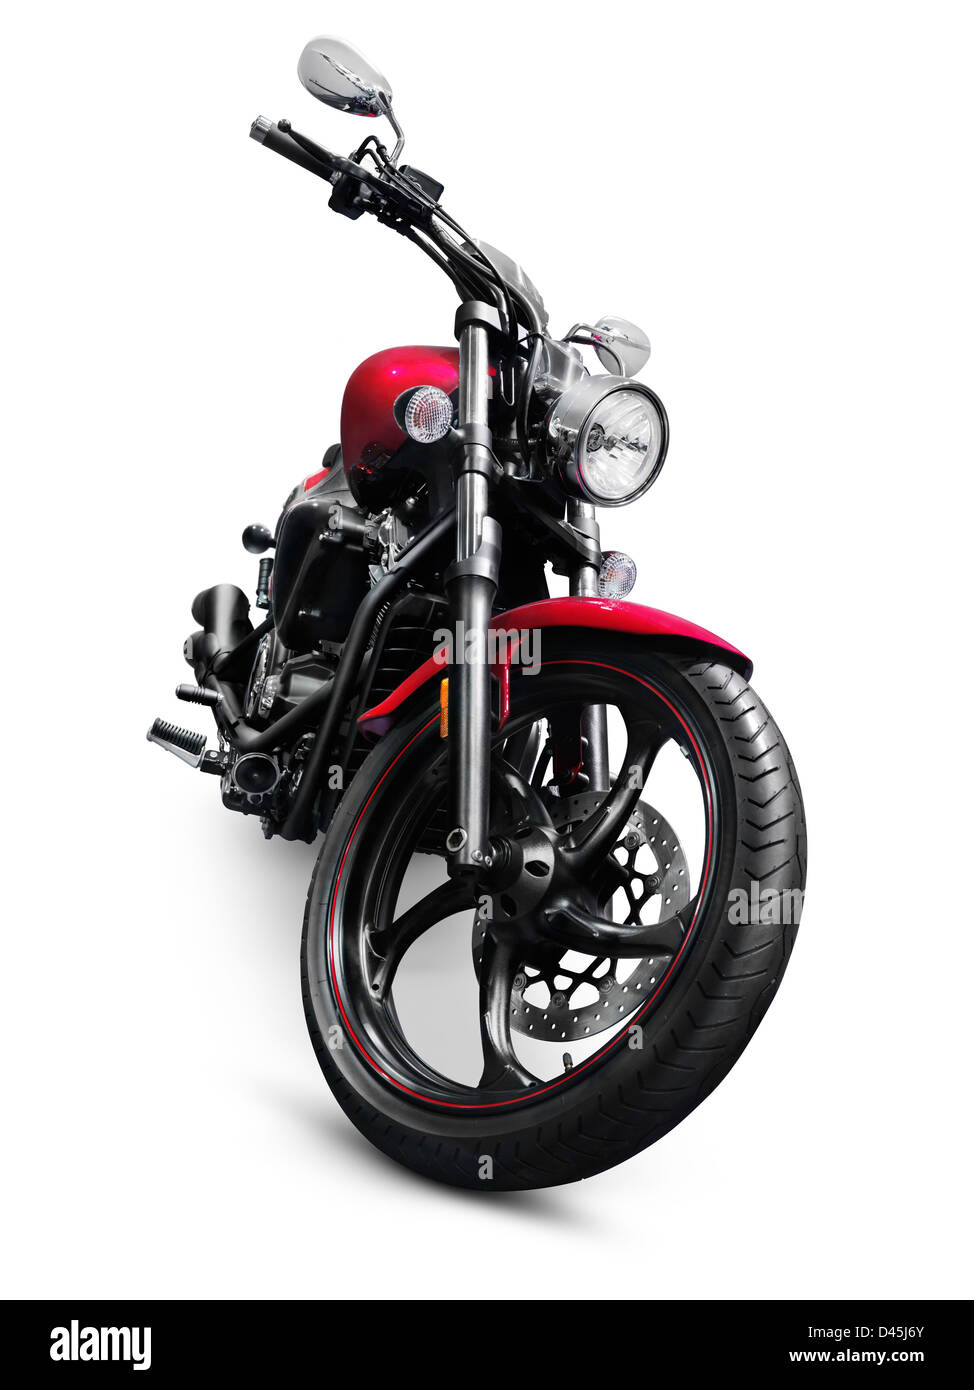 License available at MaximImages.com - 2013 Yamaha Star V 1300 motorbike. Isolated motorcycle on white background with clipping path Stock Photo